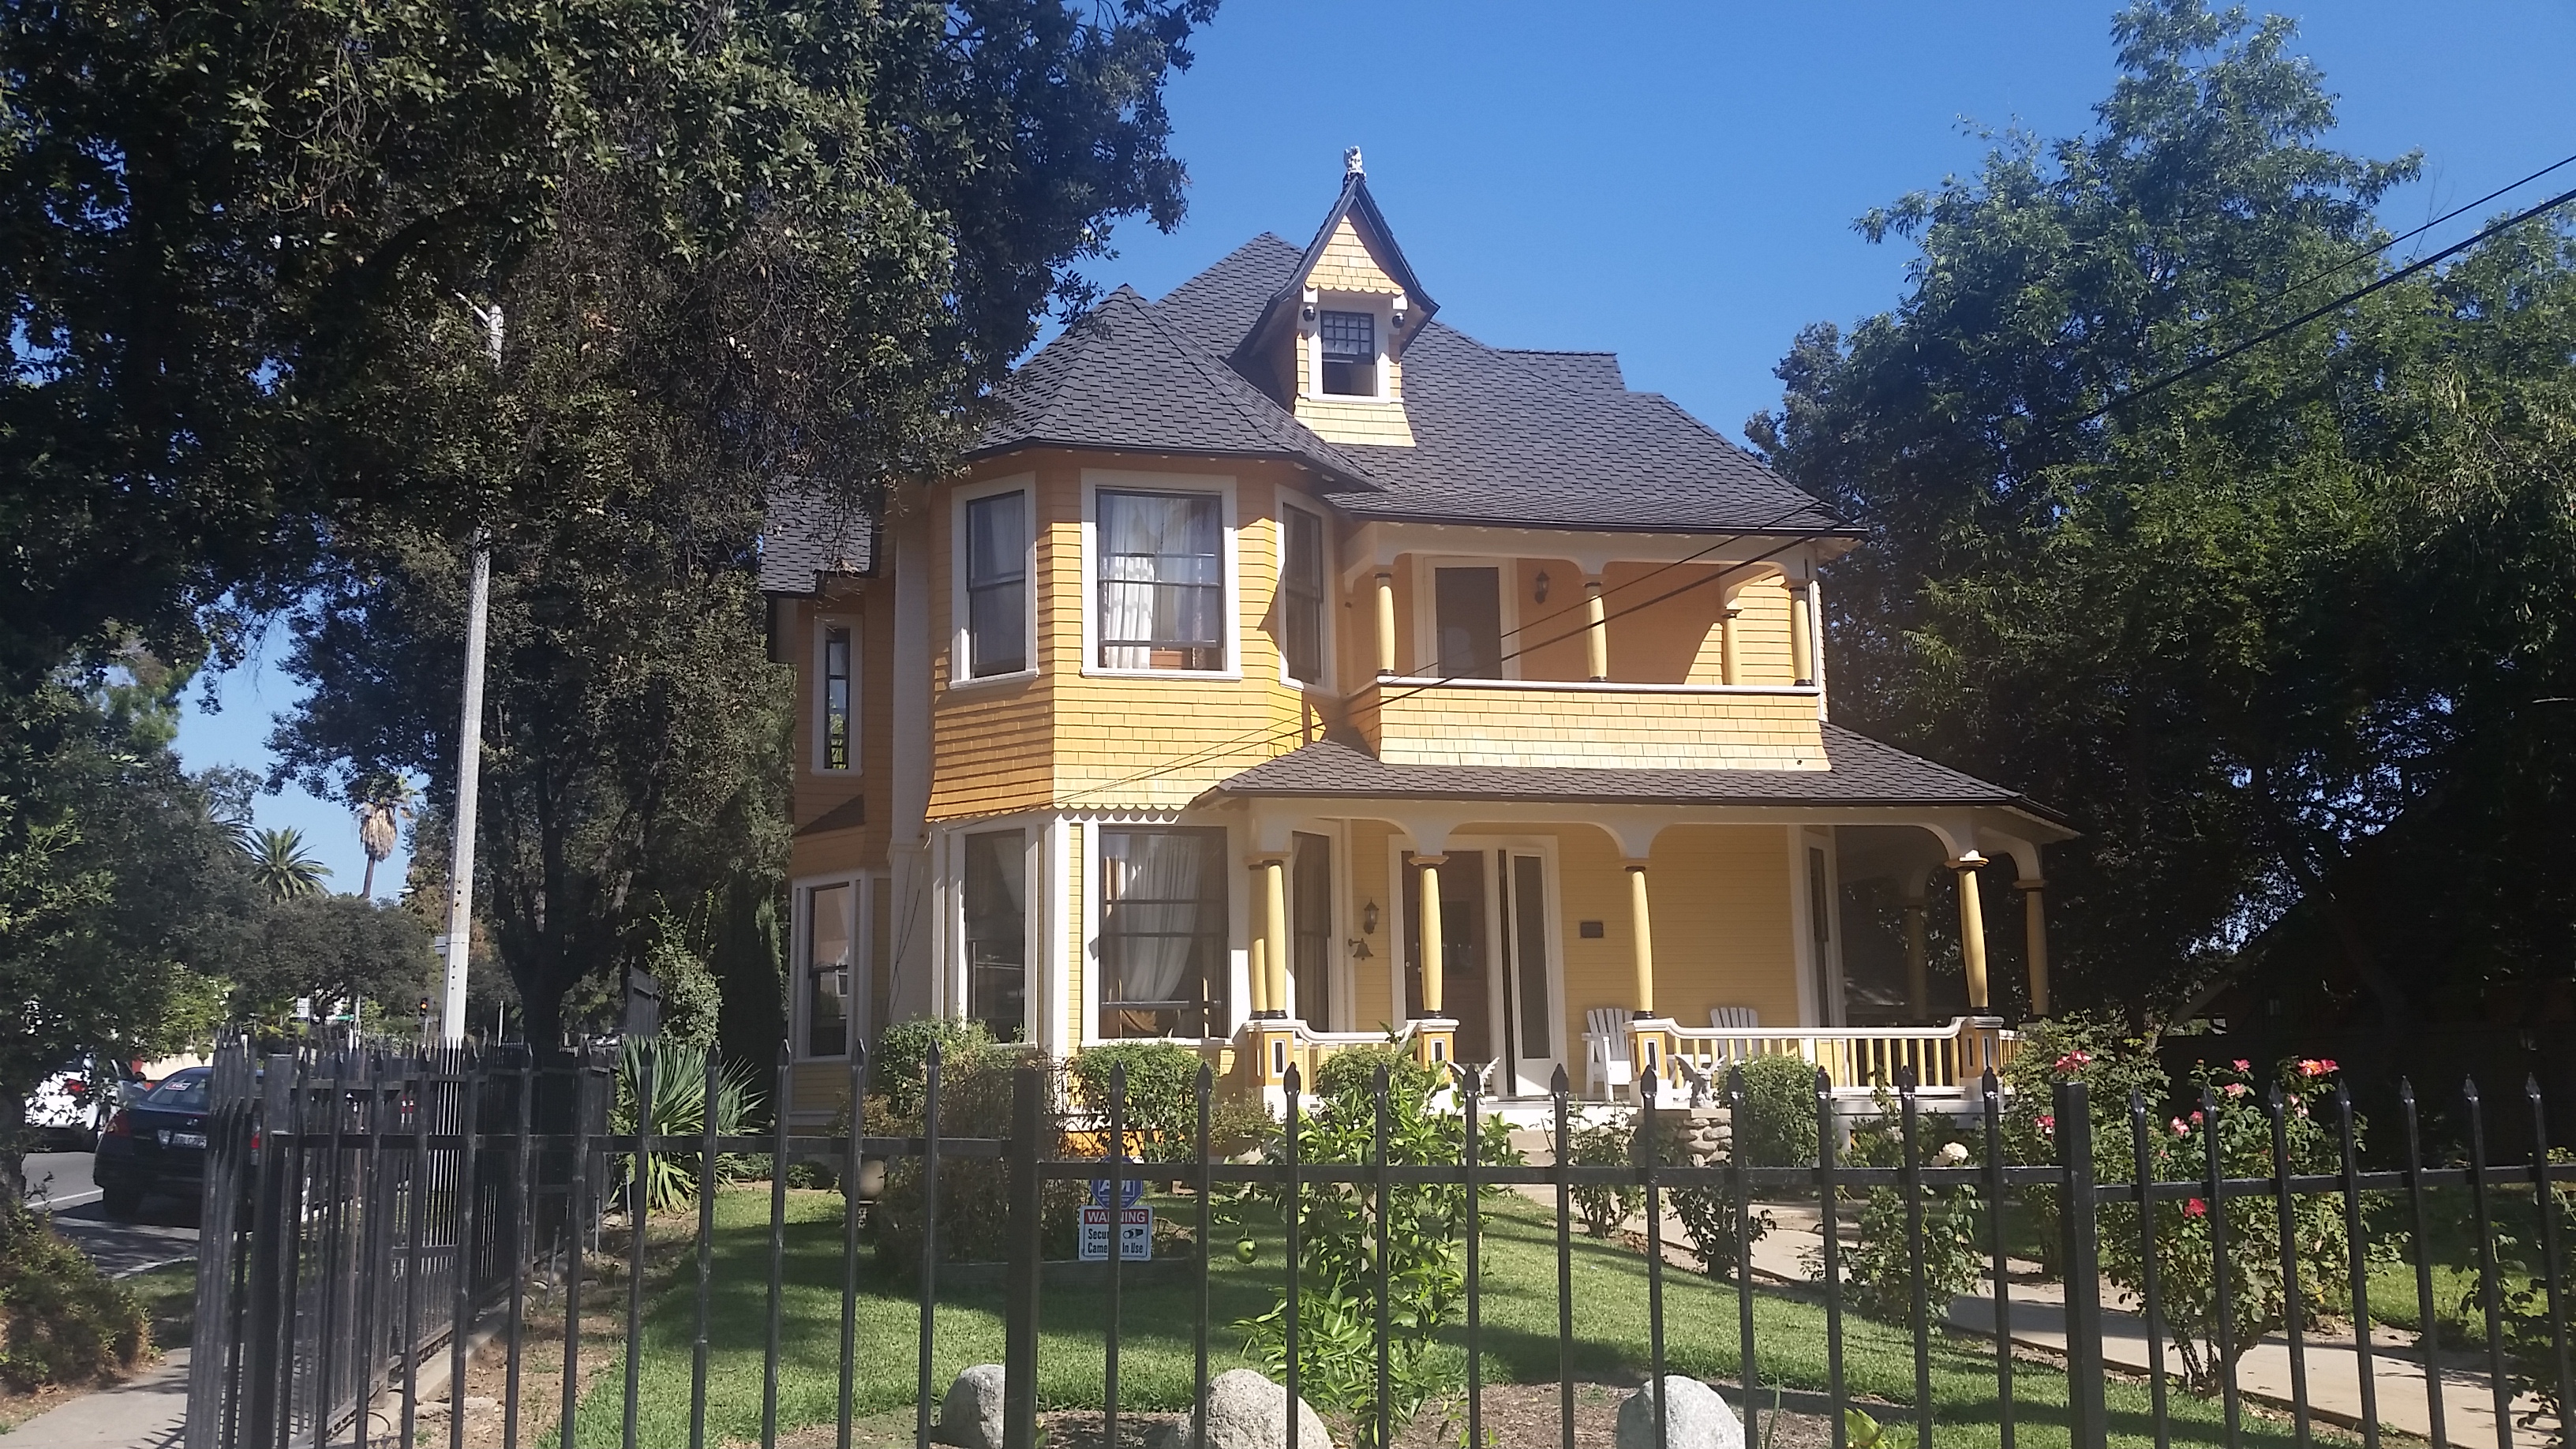 The Ernest Wood House in October 2015